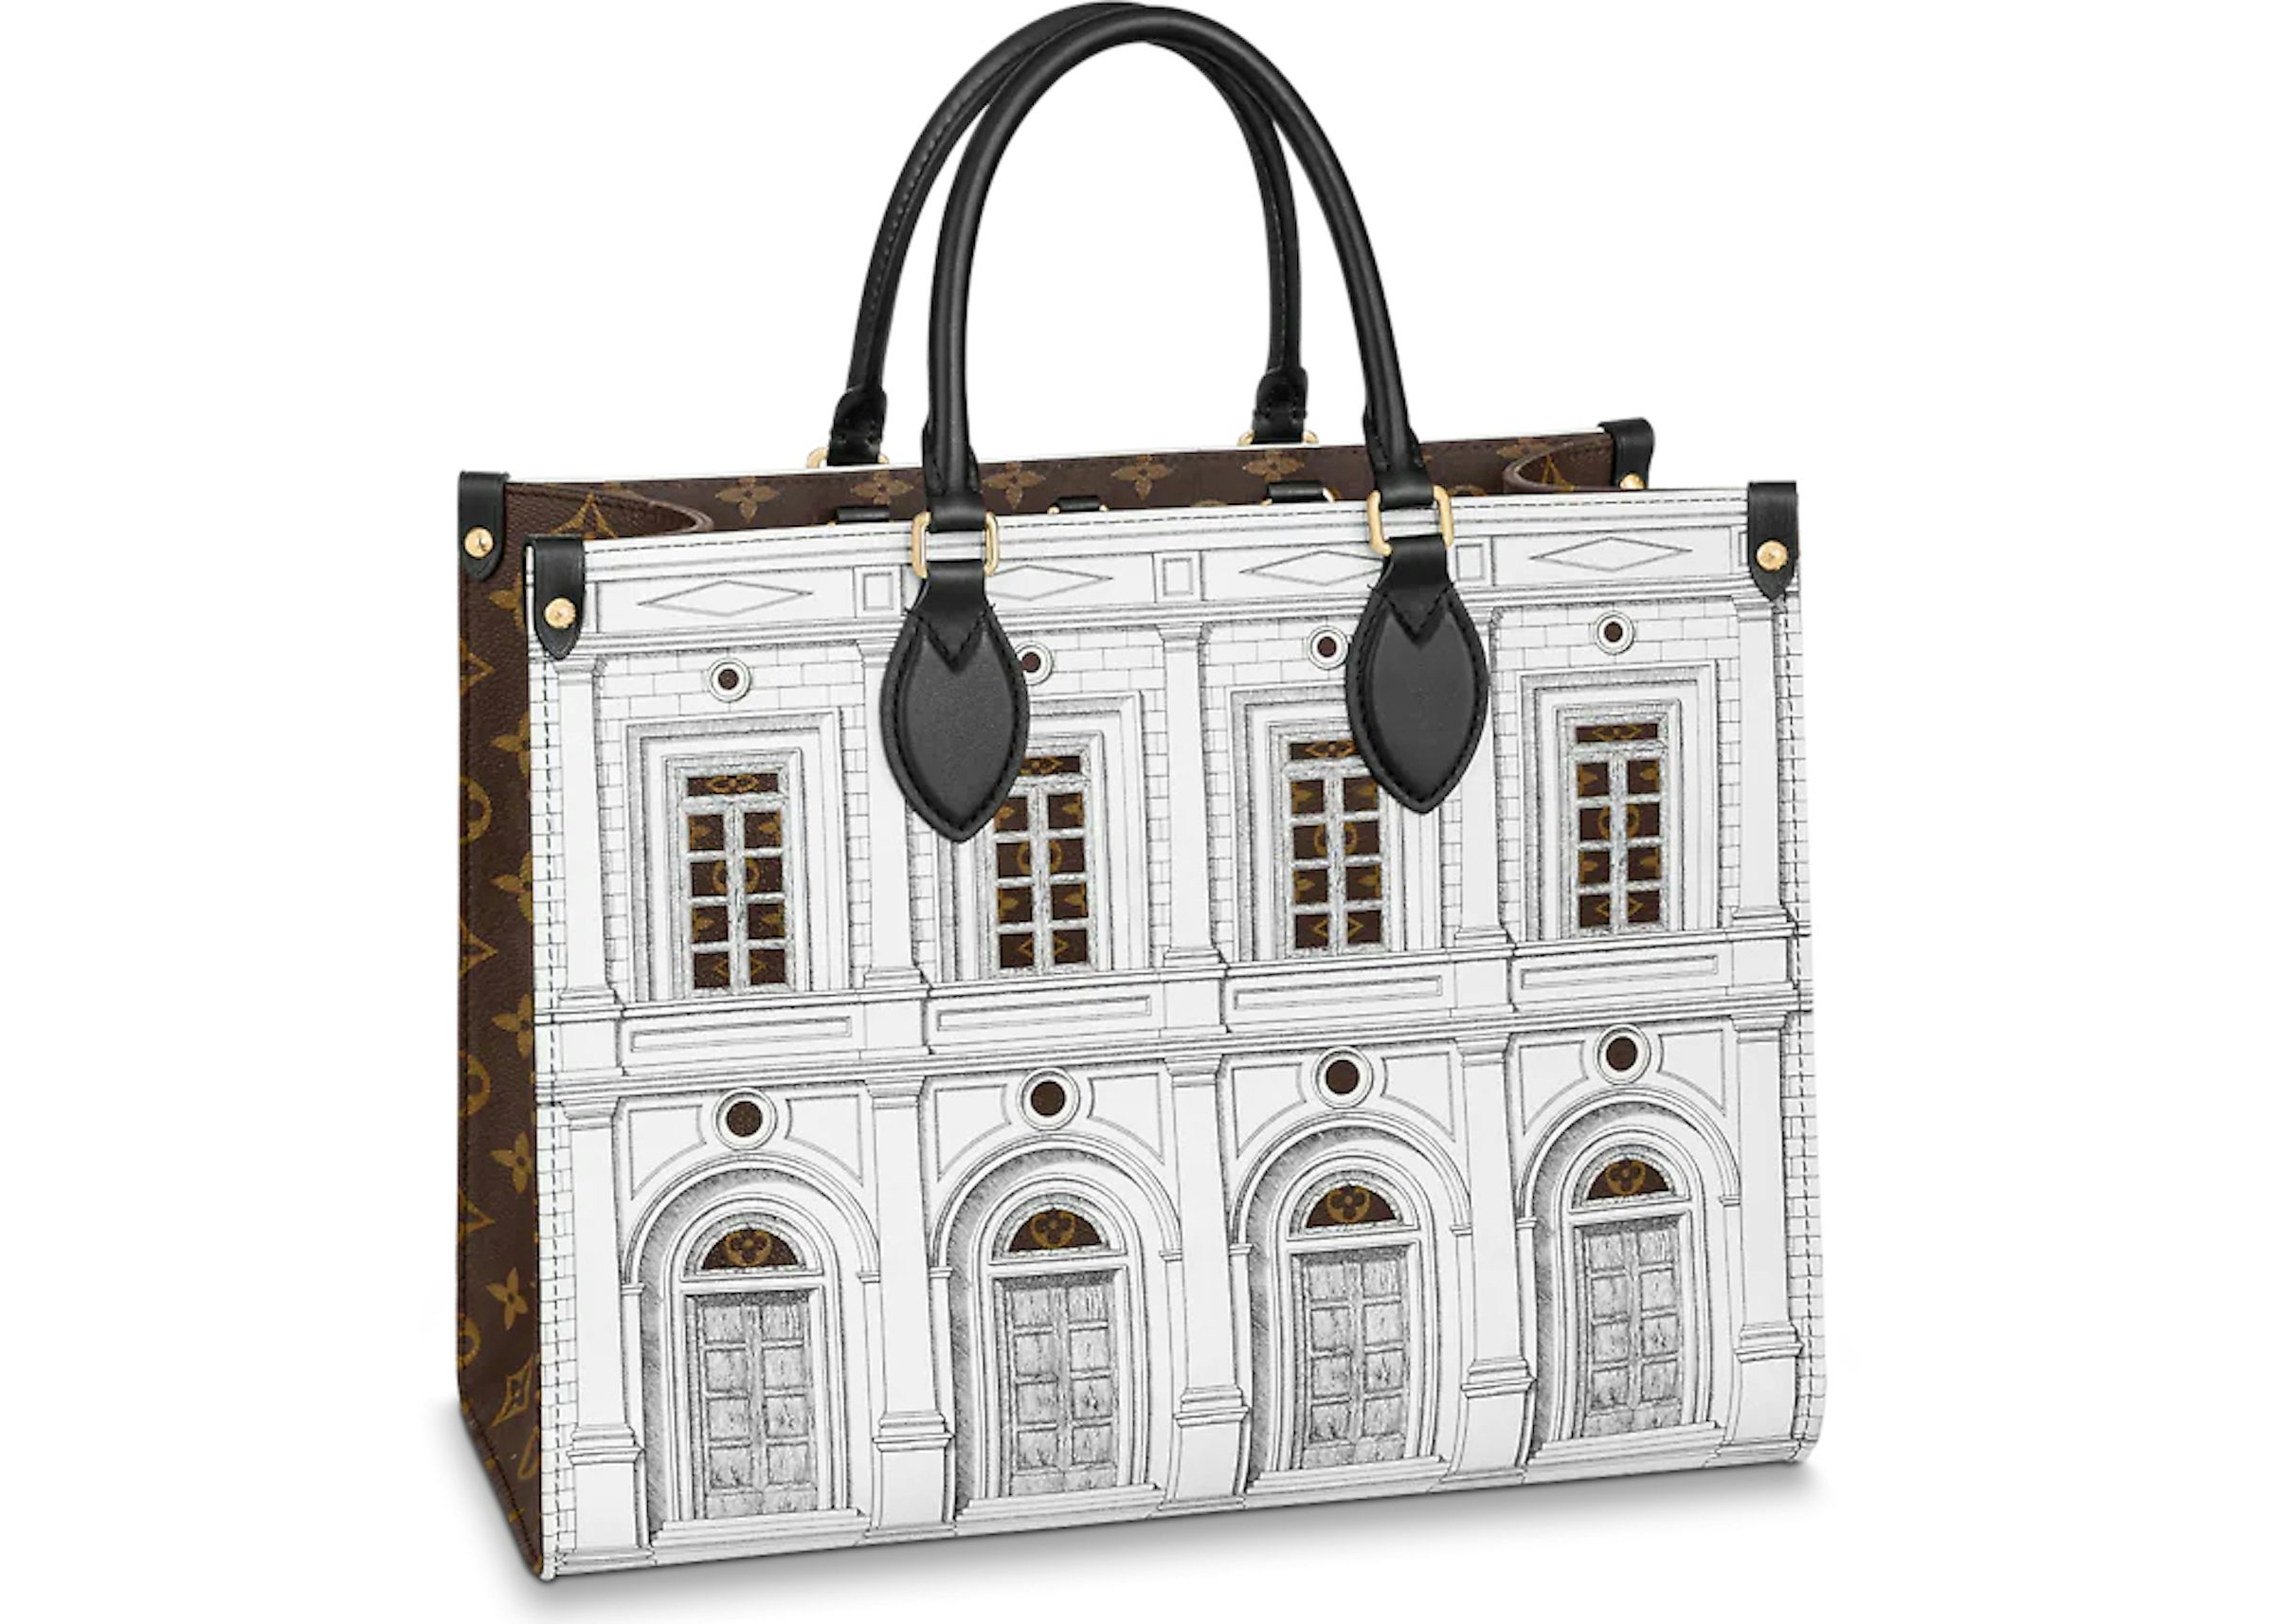 SEE: The Louis Vuitton x Fornasetti collection